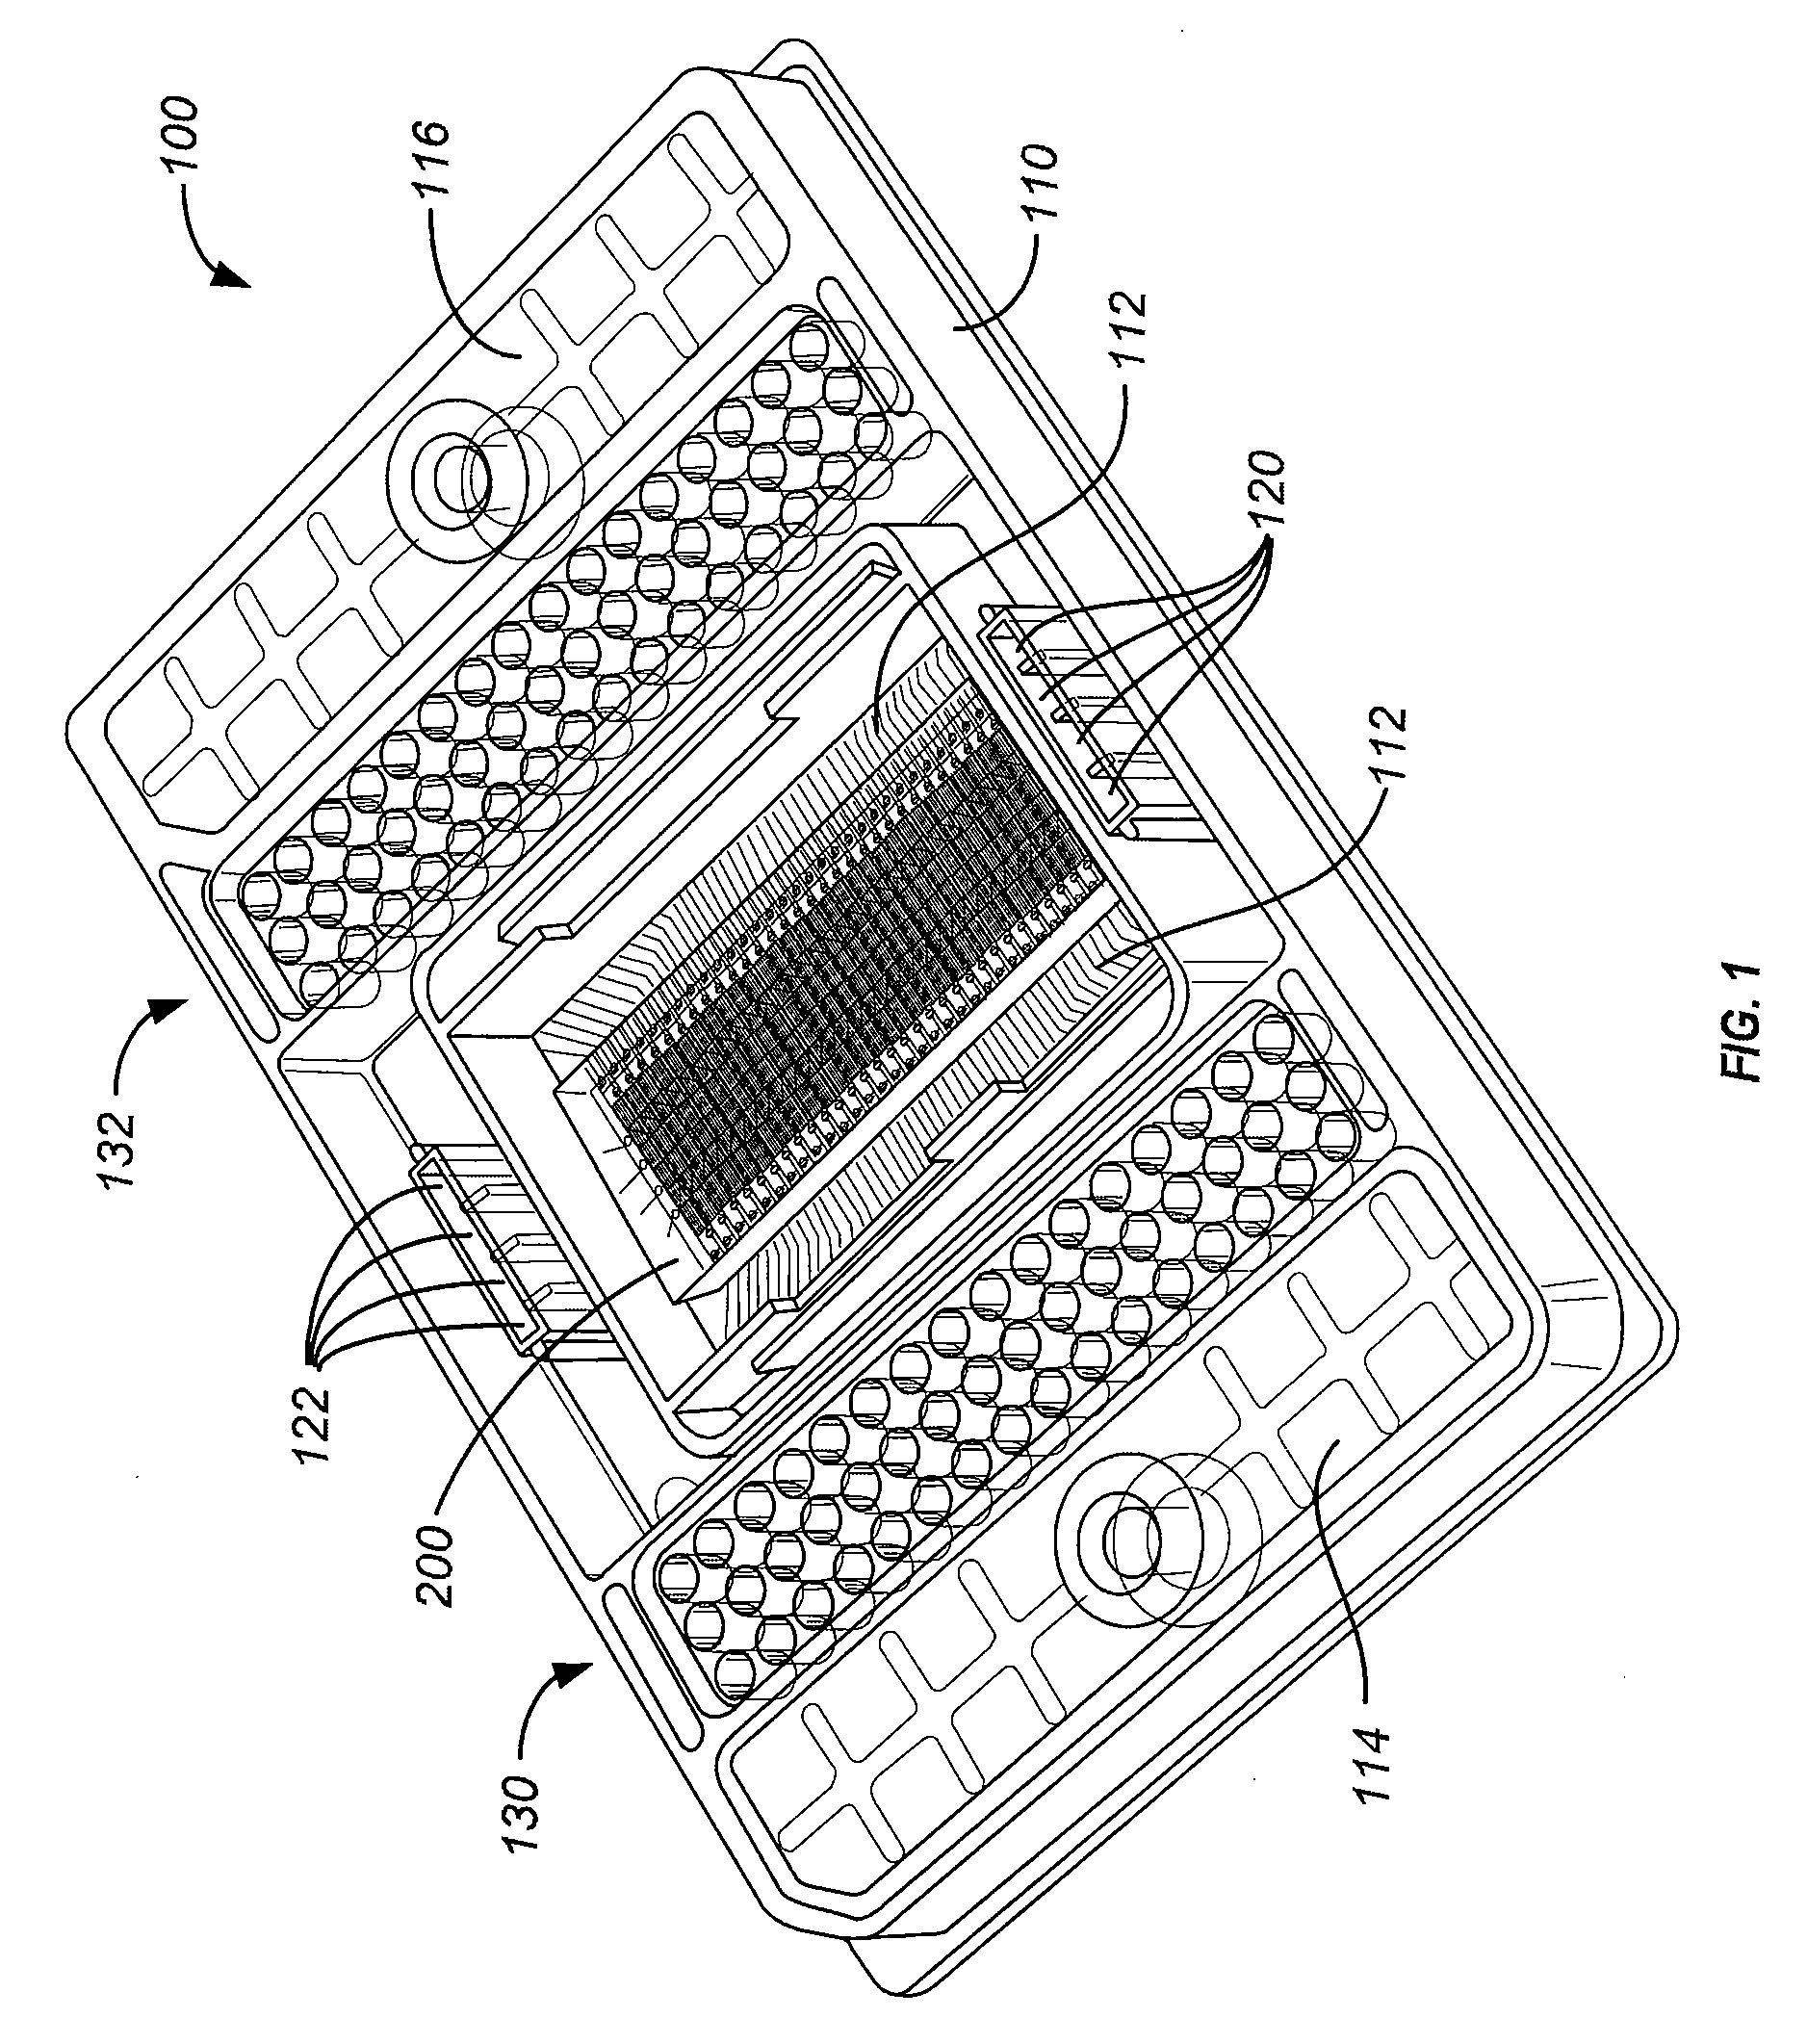 Method and system for crystallization and x-ray diffraction screening